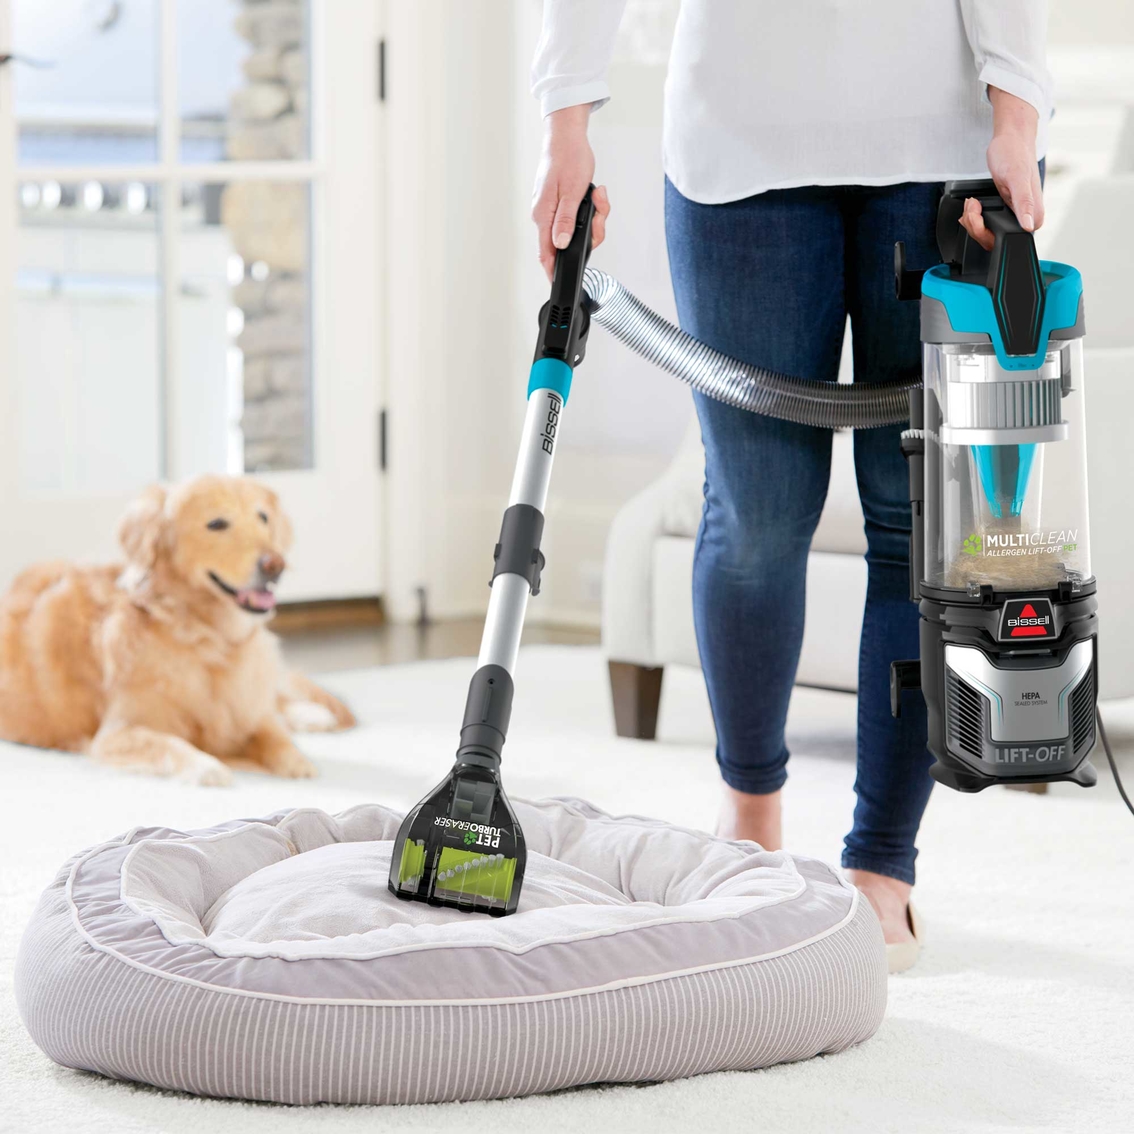 Bissell MultiClean Allergen Lift Off Pet Slim - The Best Bissell Upright  Yet! 